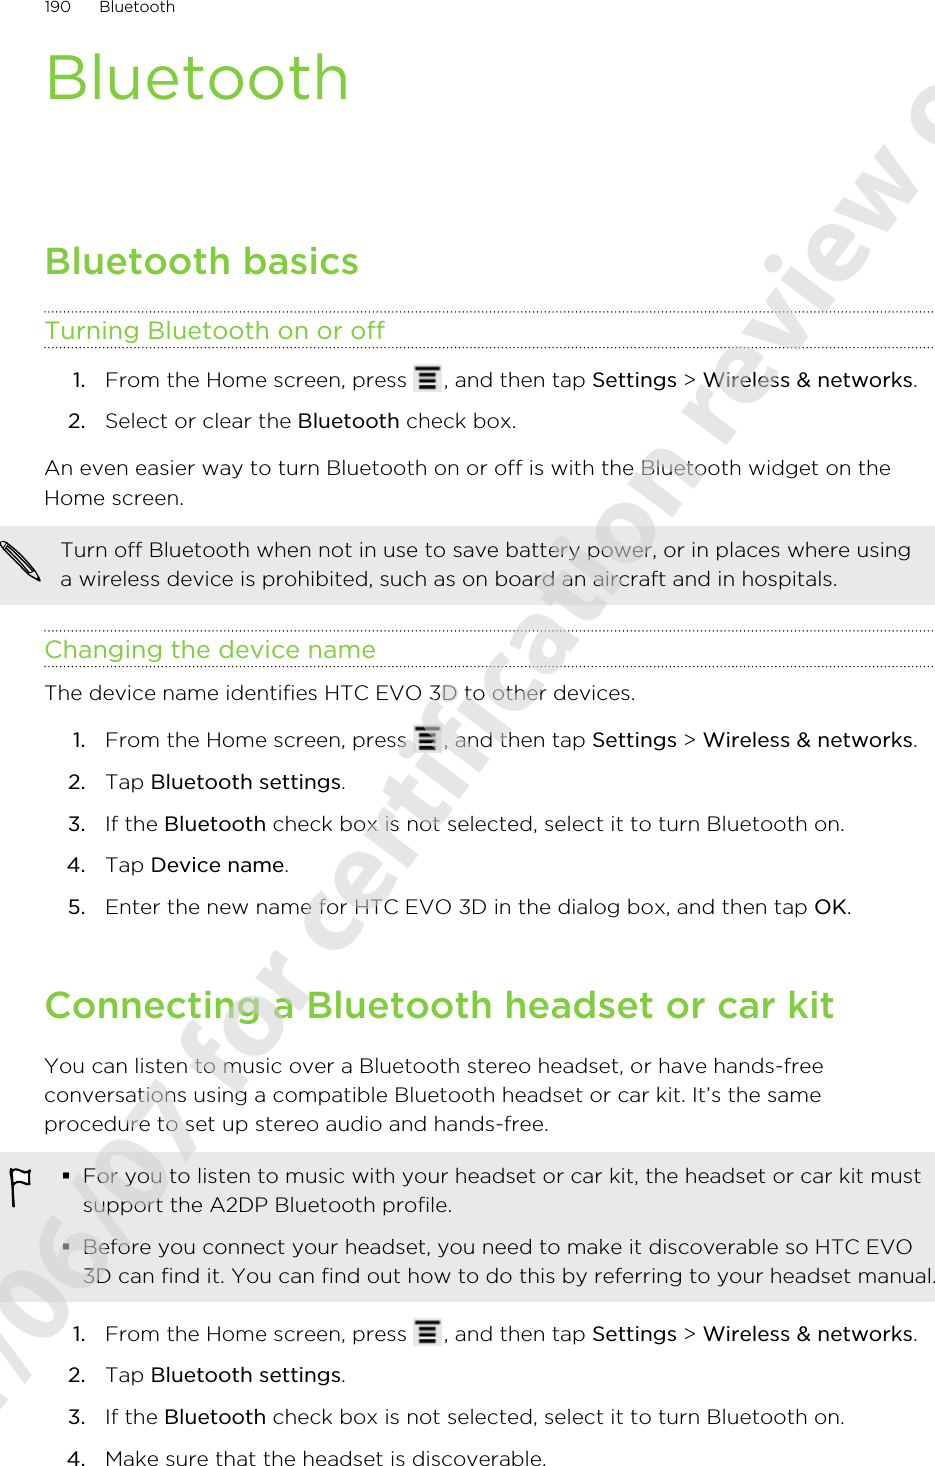 BluetoothBluetooth basicsTurning Bluetooth on or off1. From the Home screen, press  , and then tap Settings &gt; Wireless &amp; networks.2. Select or clear the Bluetooth check box.An even easier way to turn Bluetooth on or off is with the Bluetooth widget on theHome screen.Turn off Bluetooth when not in use to save battery power, or in places where usinga wireless device is prohibited, such as on board an aircraft and in hospitals.Changing the device nameThe device name identifies HTC EVO 3D to other devices.1. From the Home screen, press  , and then tap Settings &gt; Wireless &amp; networks.2. Tap Bluetooth settings.3. If the Bluetooth check box is not selected, select it to turn Bluetooth on.4. Tap Device name.5. Enter the new name for HTC EVO 3D in the dialog box, and then tap OK.Connecting a Bluetooth headset or car kitYou can listen to music over a Bluetooth stereo headset, or have hands-freeconversations using a compatible Bluetooth headset or car kit. It’s the sameprocedure to set up stereo audio and hands-free.§For you to listen to music with your headset or car kit, the headset or car kit mustsupport the A2DP Bluetooth profile.§Before you connect your headset, you need to make it discoverable so HTC EVO3D can find it. You can find out how to do this by referring to your headset manual.1. From the Home screen, press  , and then tap Settings &gt; Wireless &amp; networks.2. Tap Bluetooth settings.3. If the Bluetooth check box is not selected, select it to turn Bluetooth on.4. Make sure that the headset is discoverable.190 Bluetooth2011/06/07 for certification review only